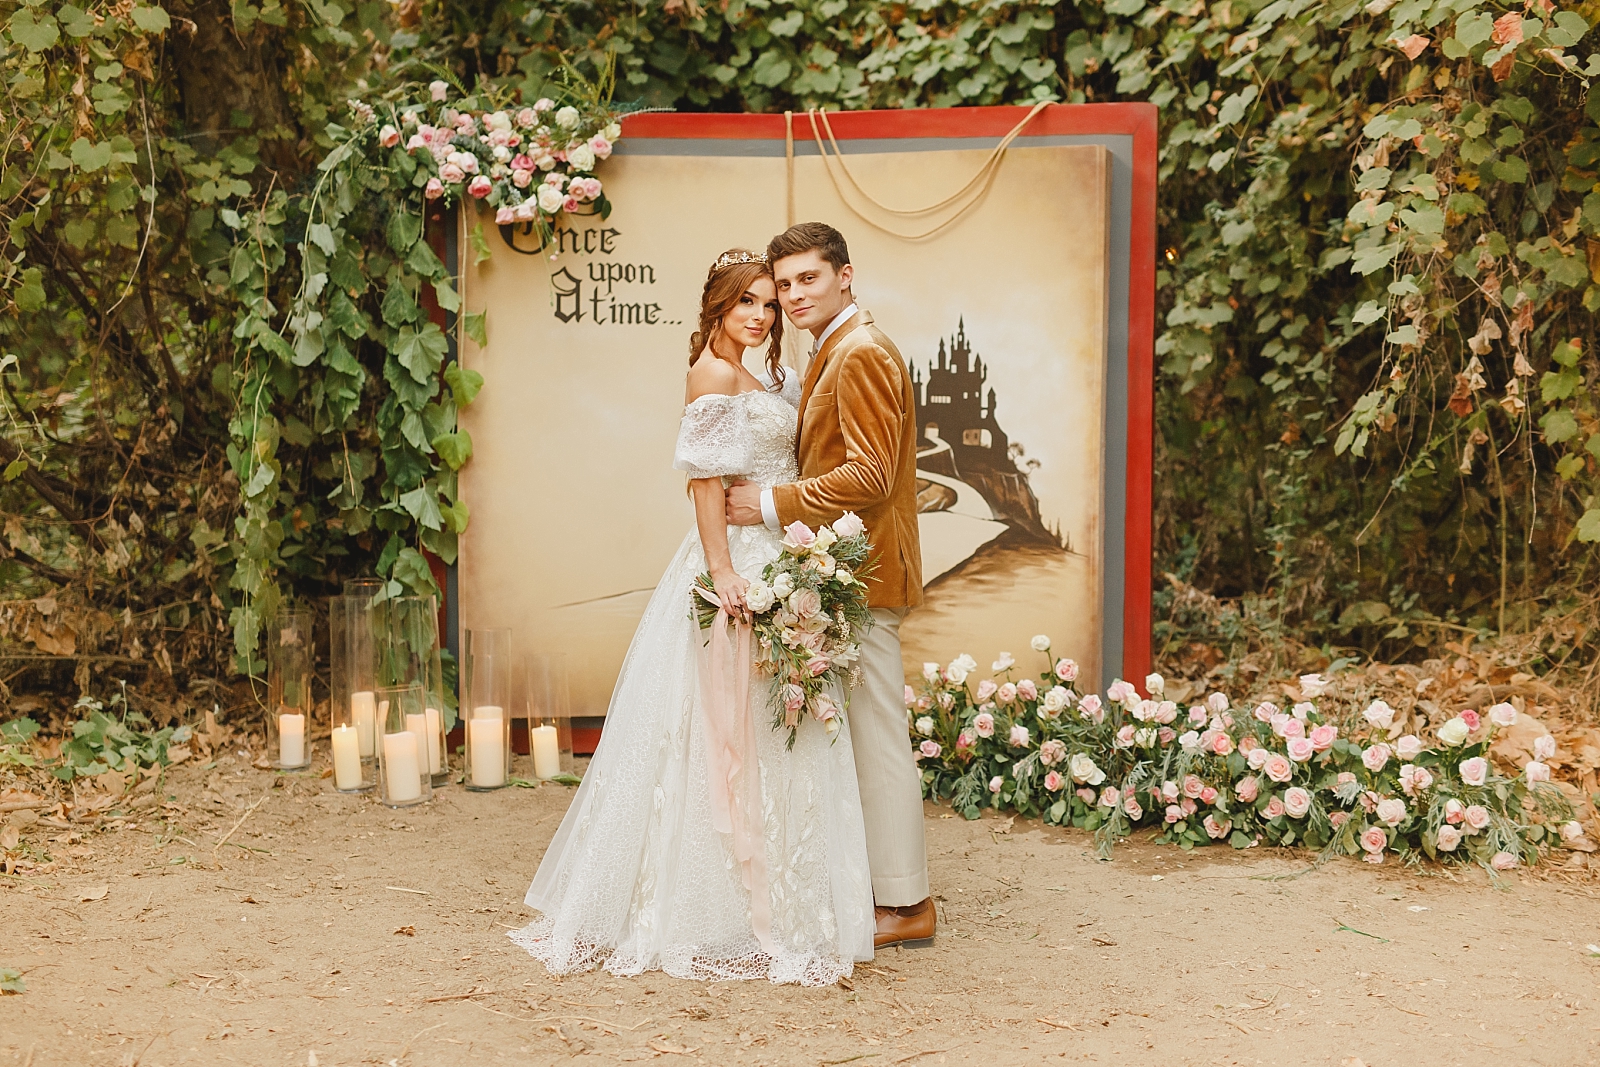 Oversized storybook prop for fairytale wedding